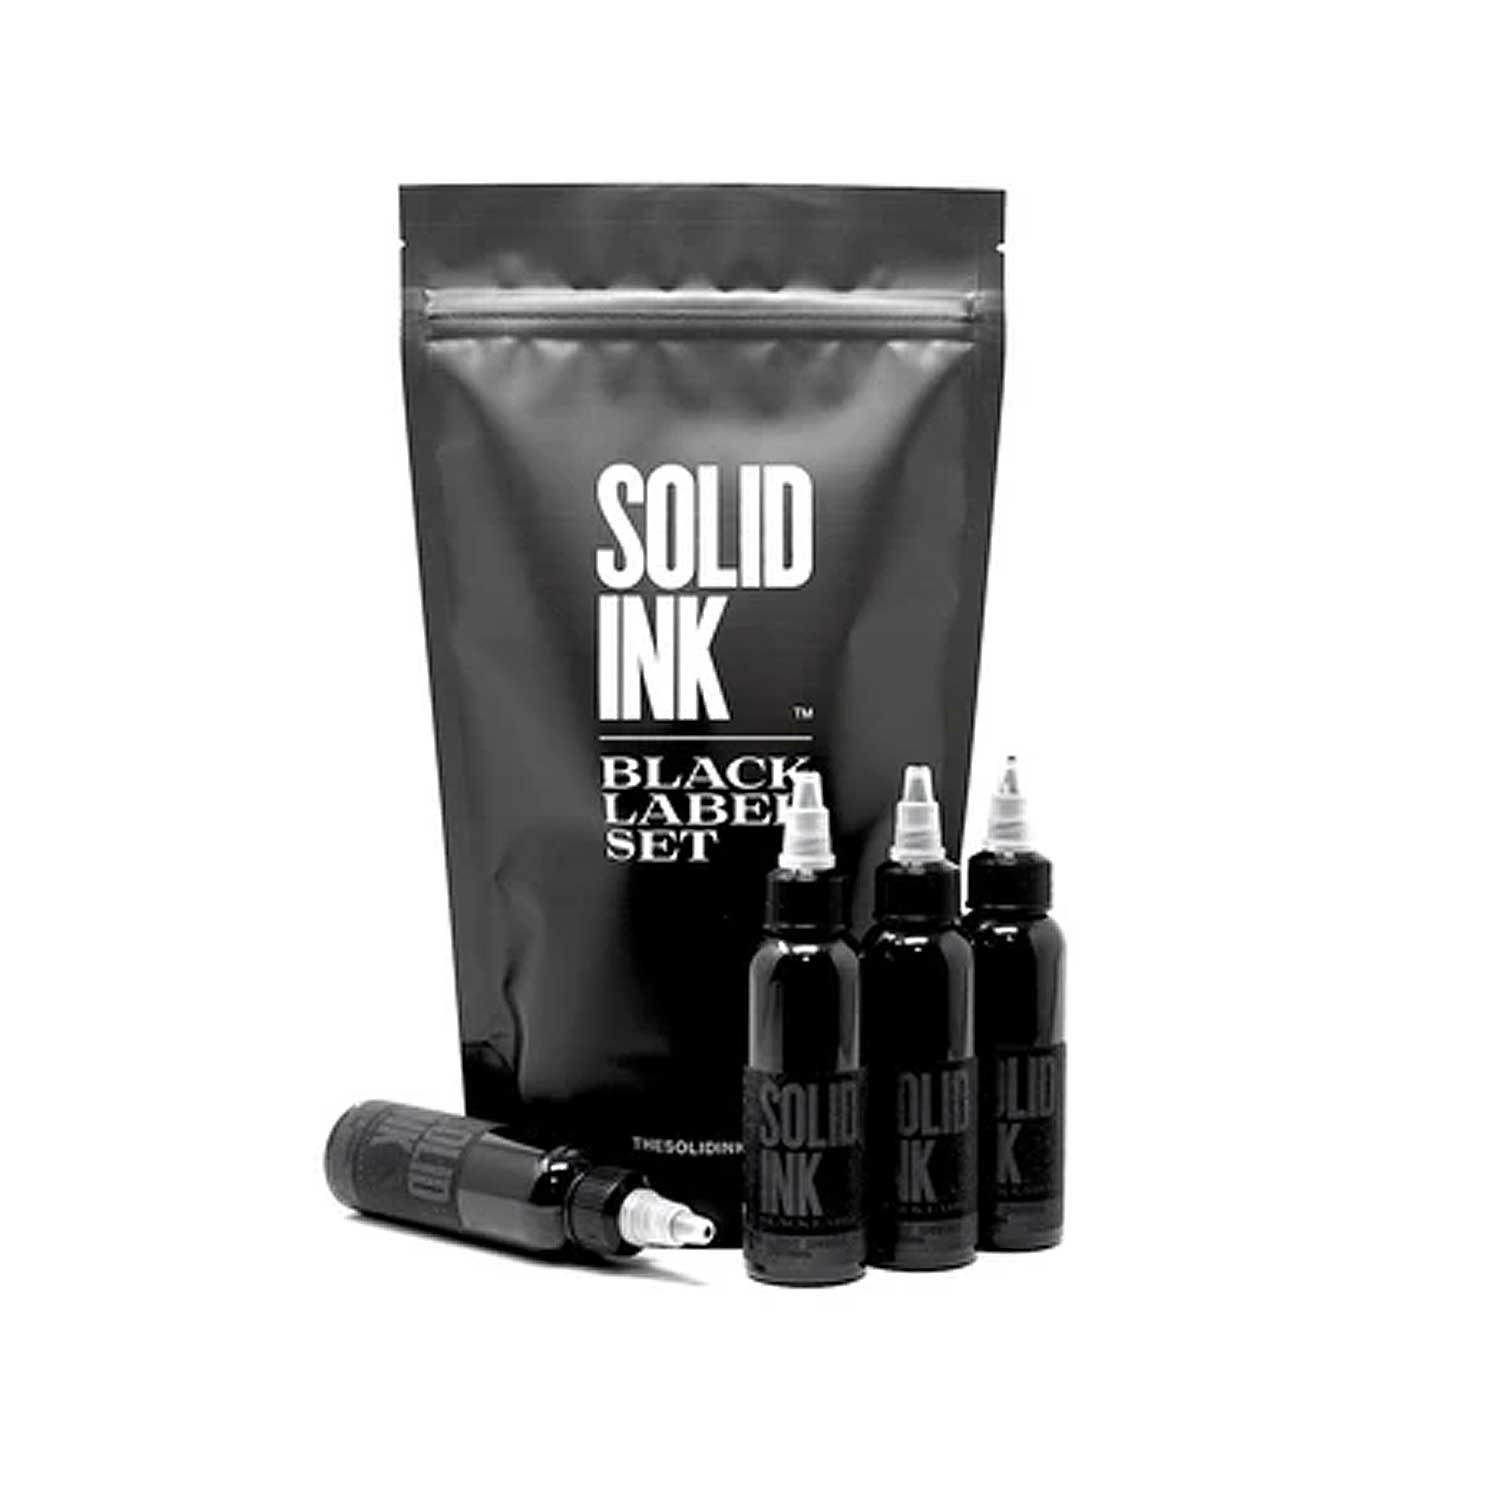 One of the many Solid Ink Sets - The Pre-Packaged Black Label Grey Wash Set